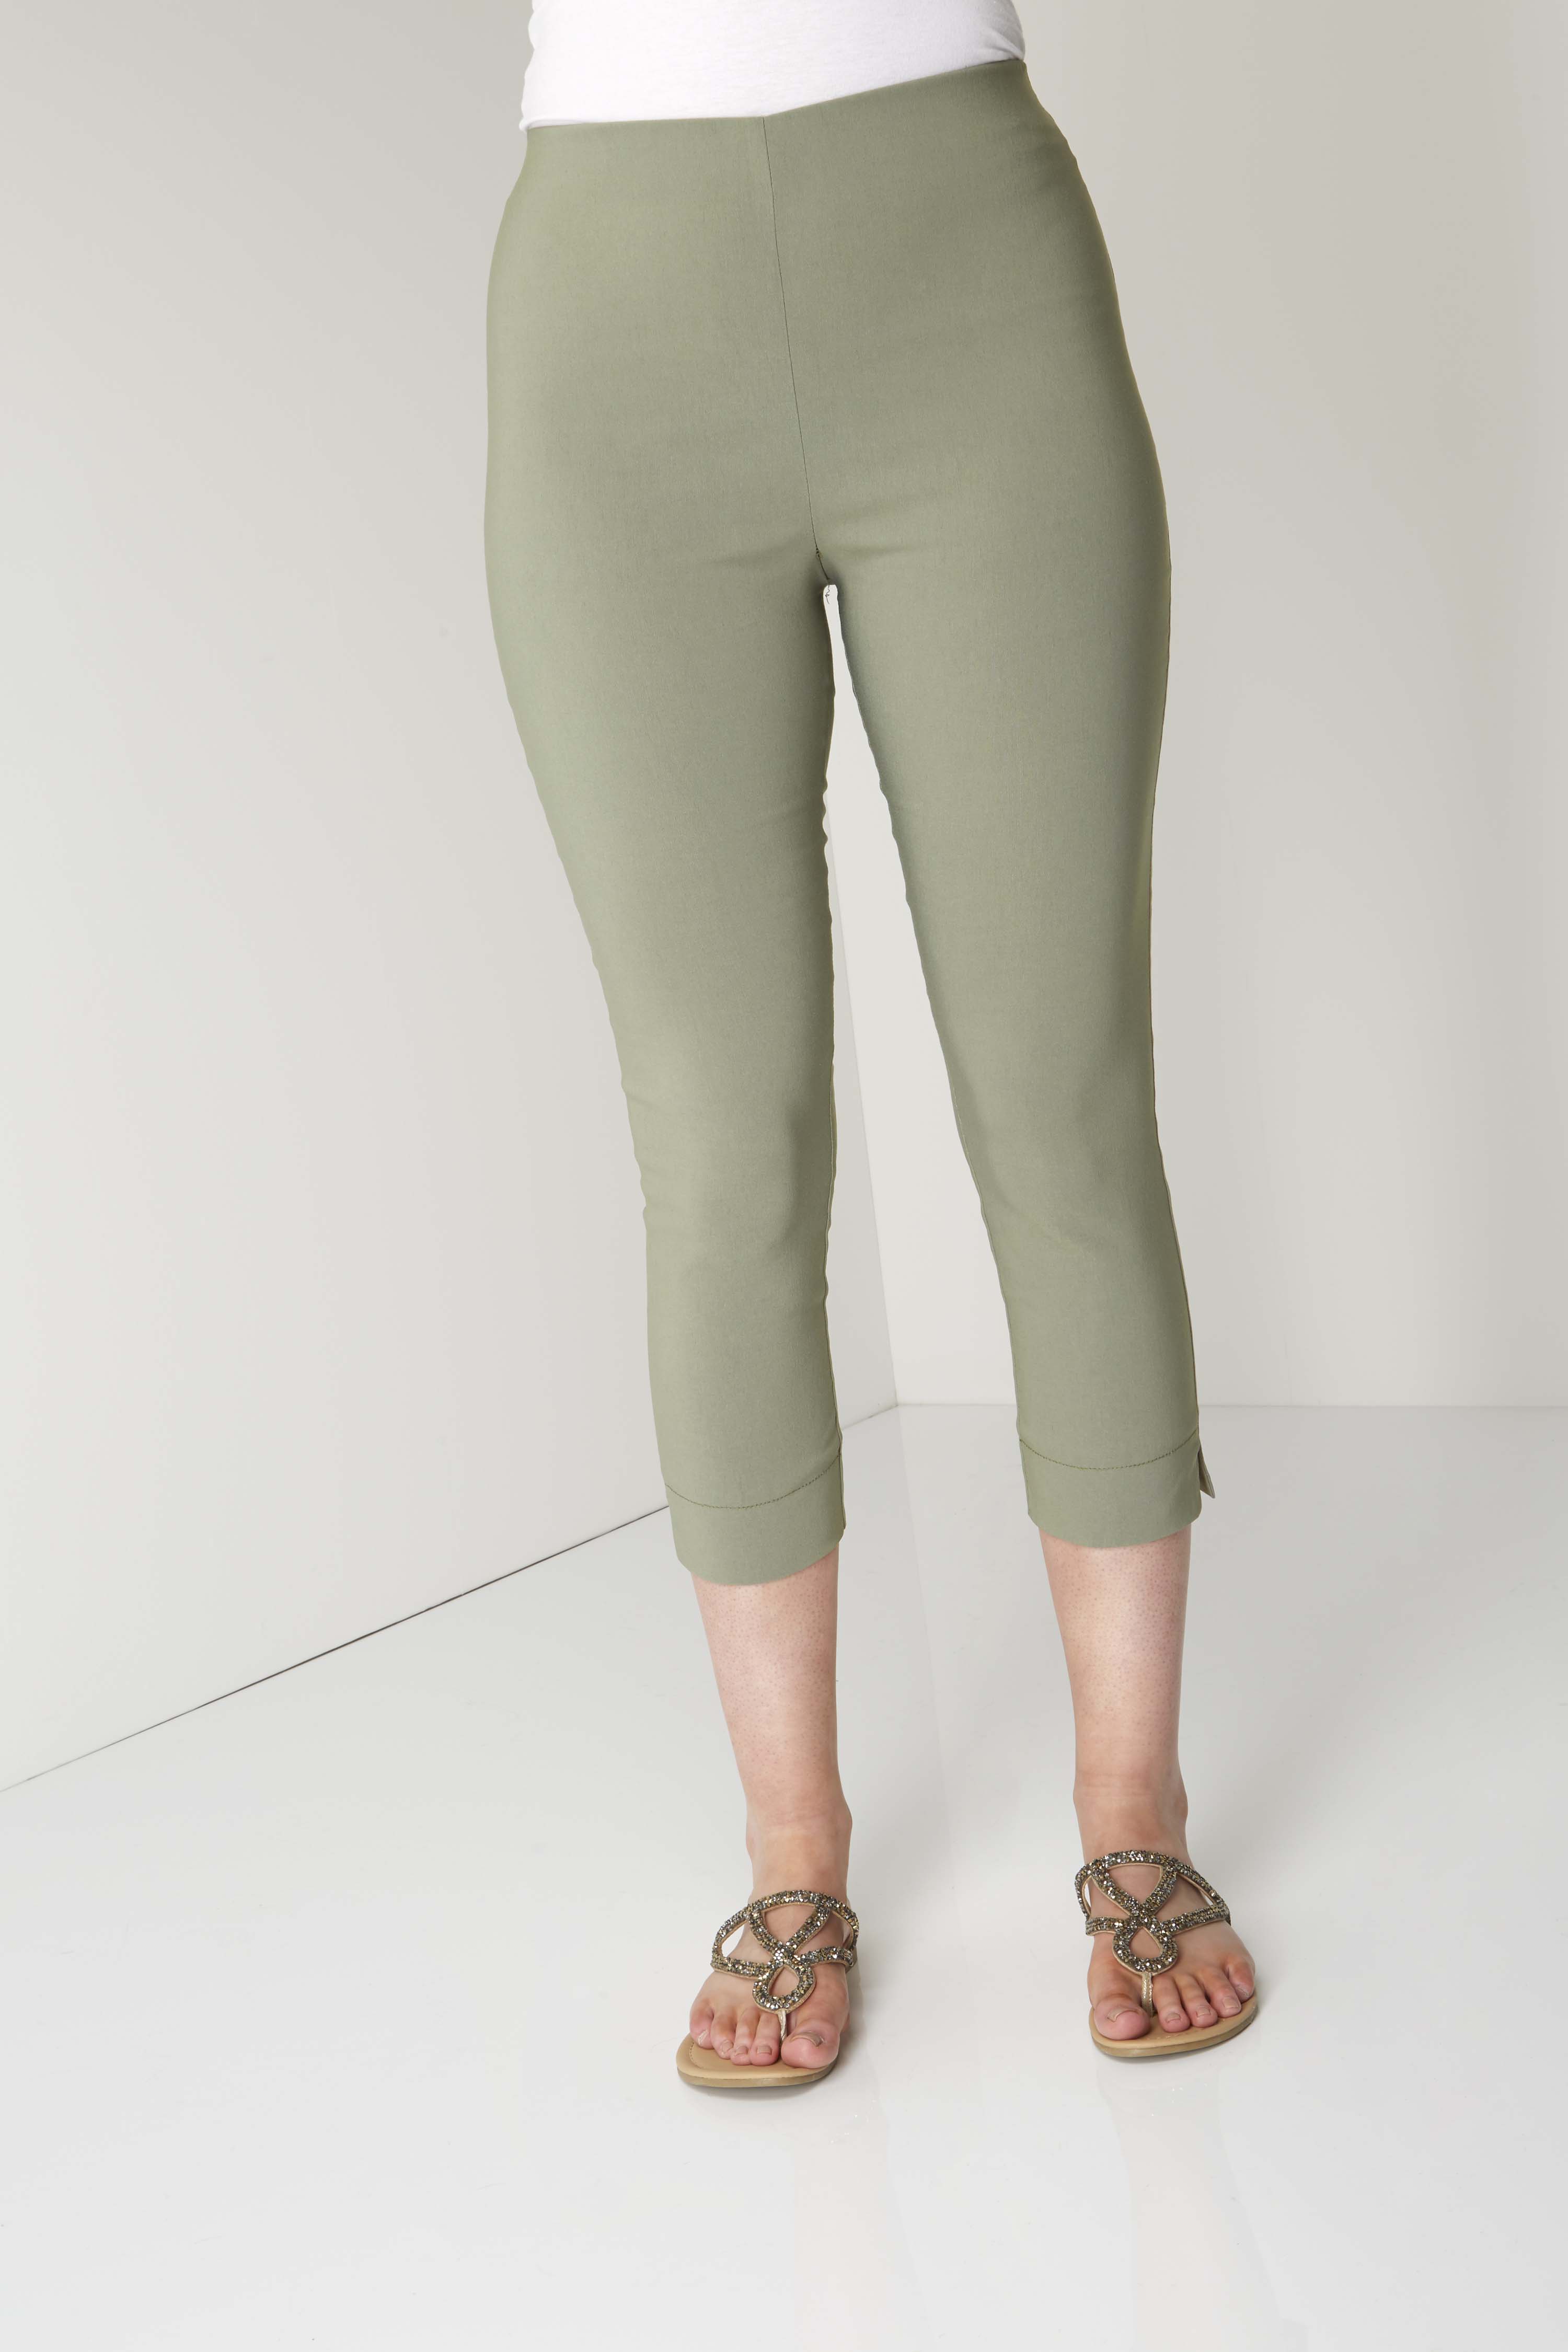 KHAKI Cropped Stretch Trouser, Image 2 of 3